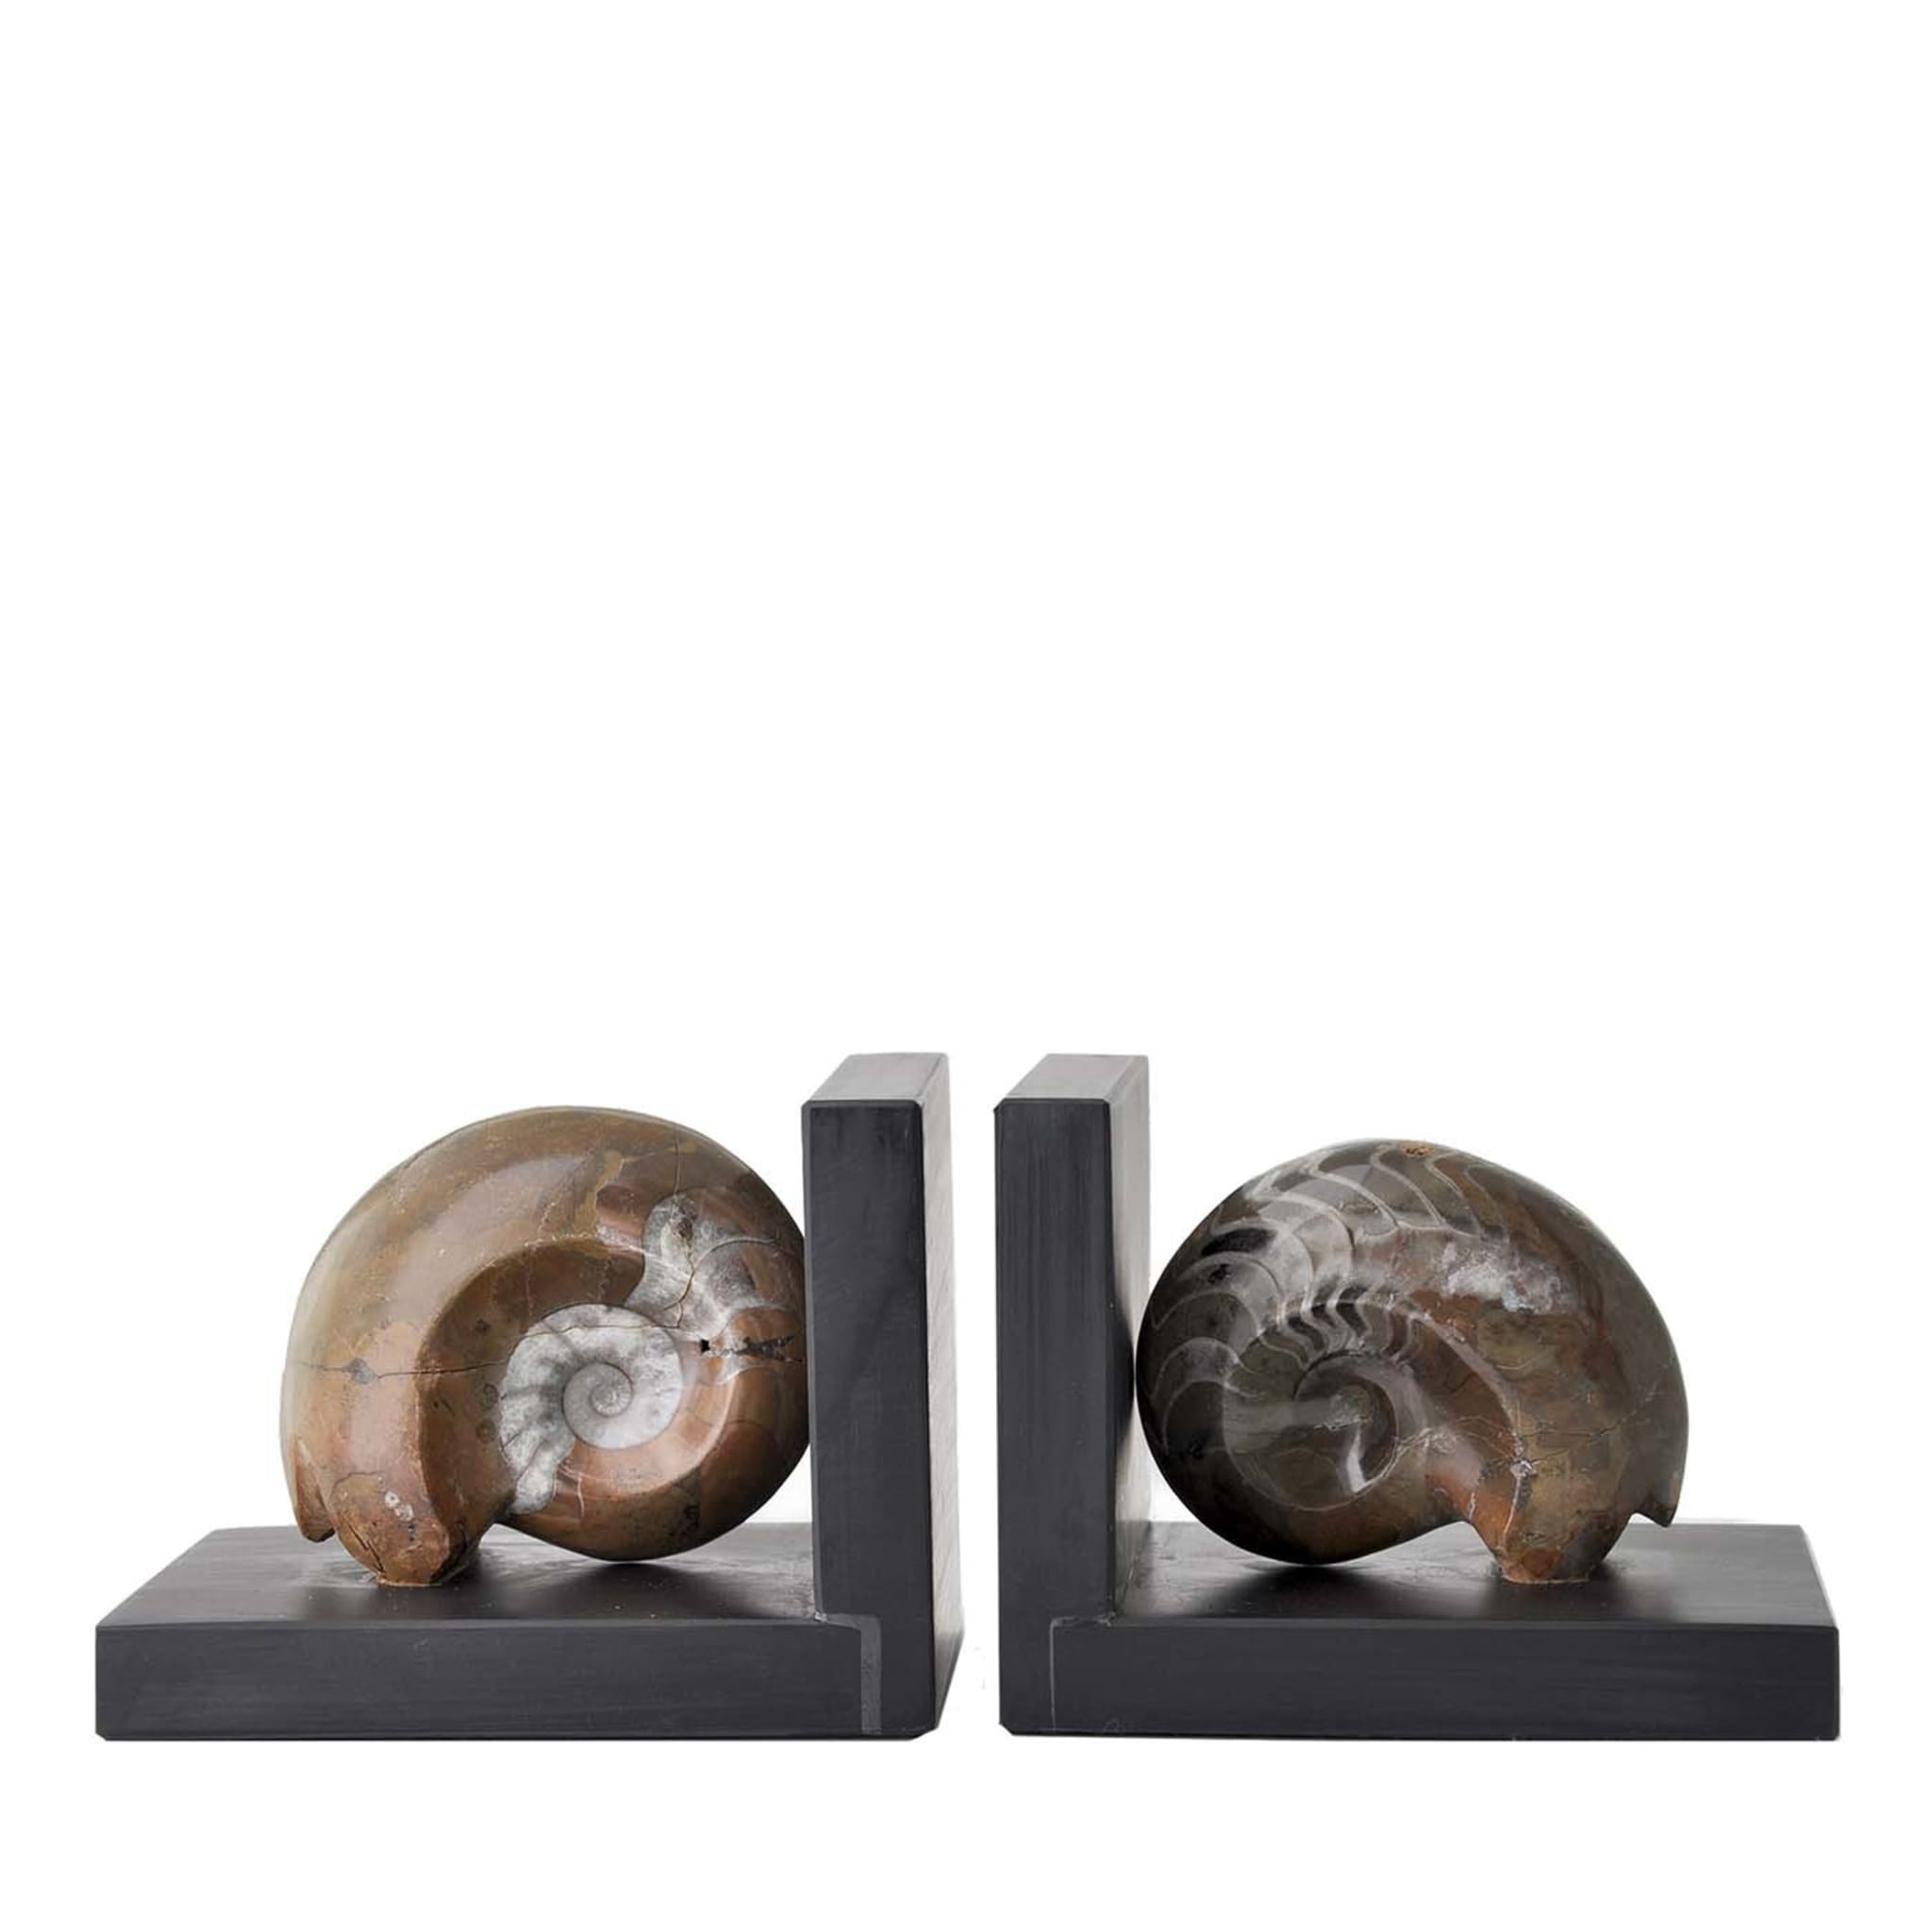 Fossiline Brown Shell Bookends by Nino Basso - Main view